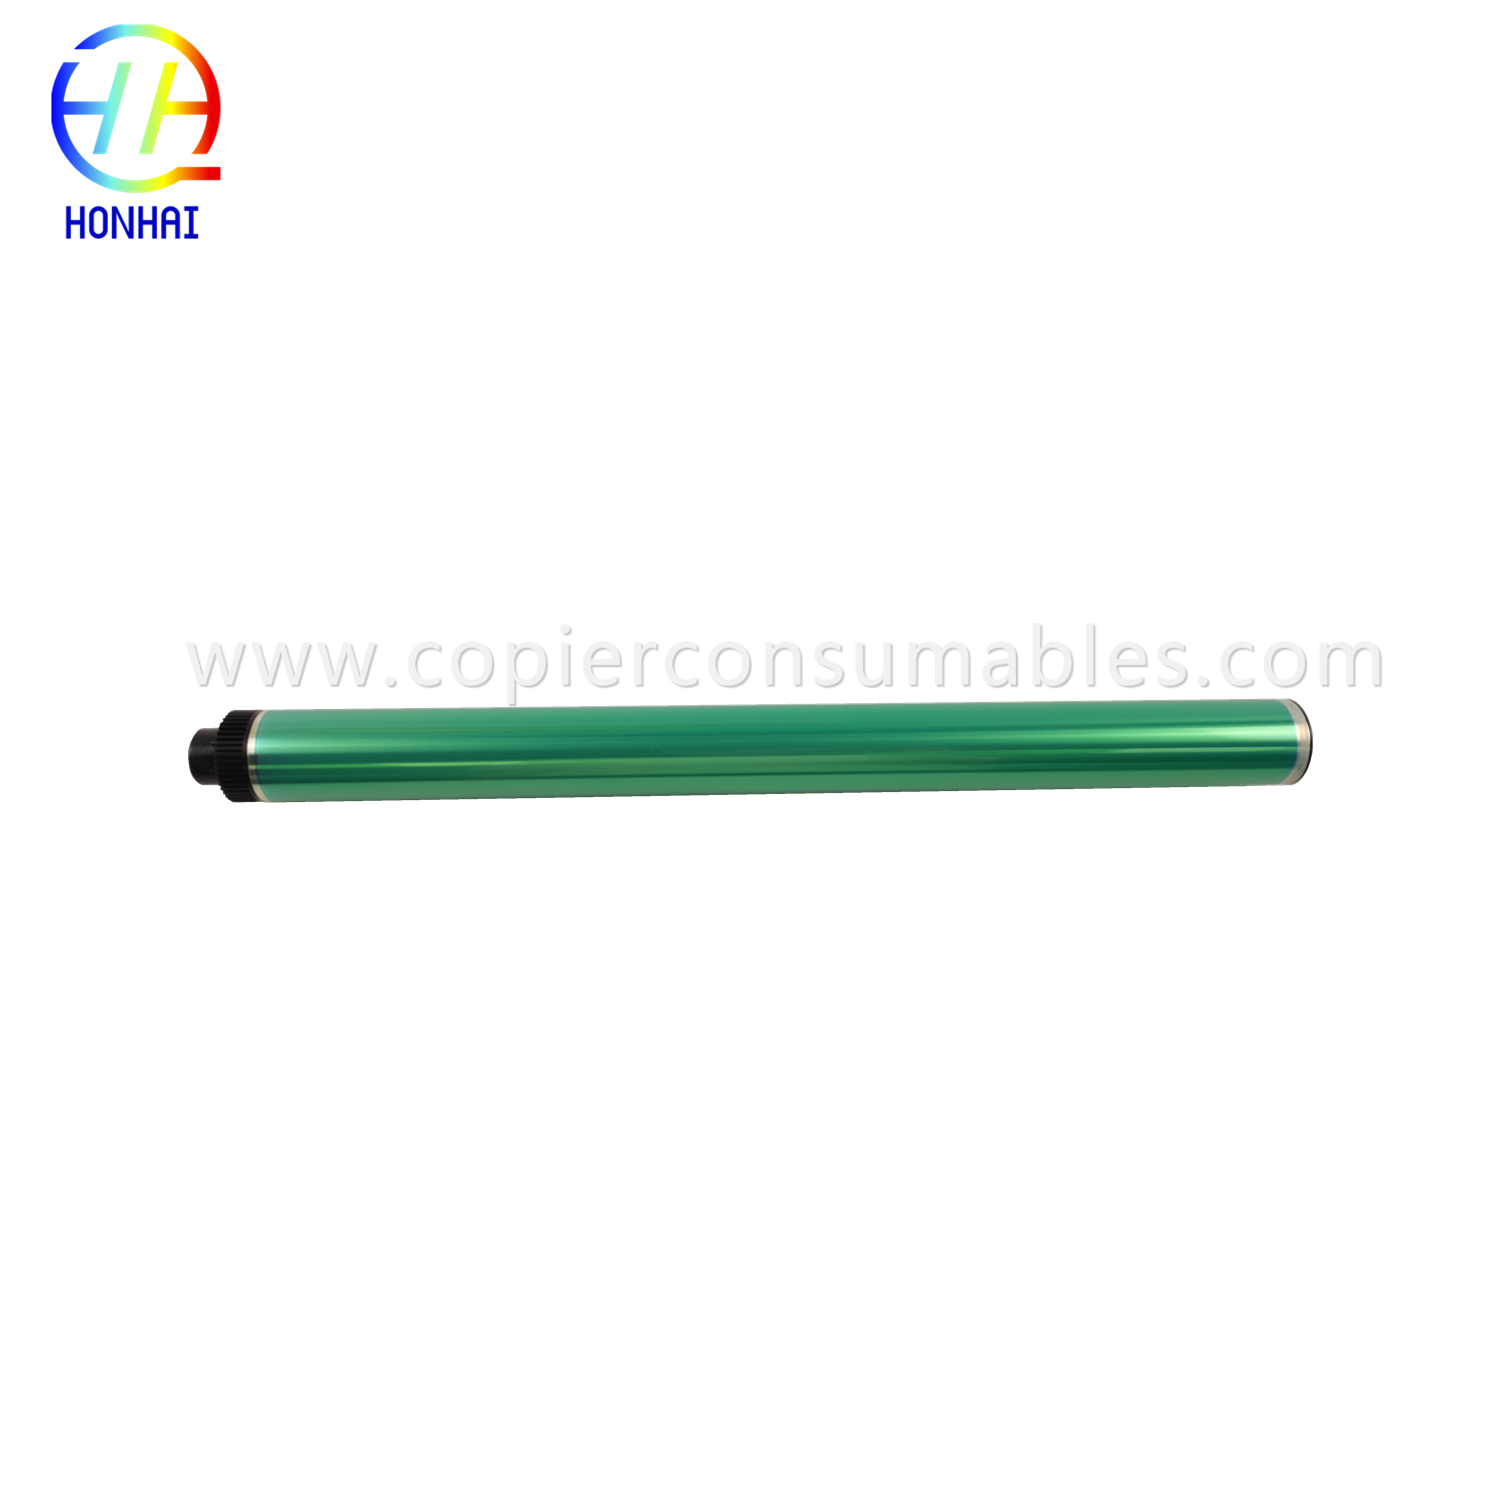 OPC Drum for HP CF257A 57A M436DN M433A M437 M439 & Samsung K2200 707 SL-K2200ND MLT-D707S R707